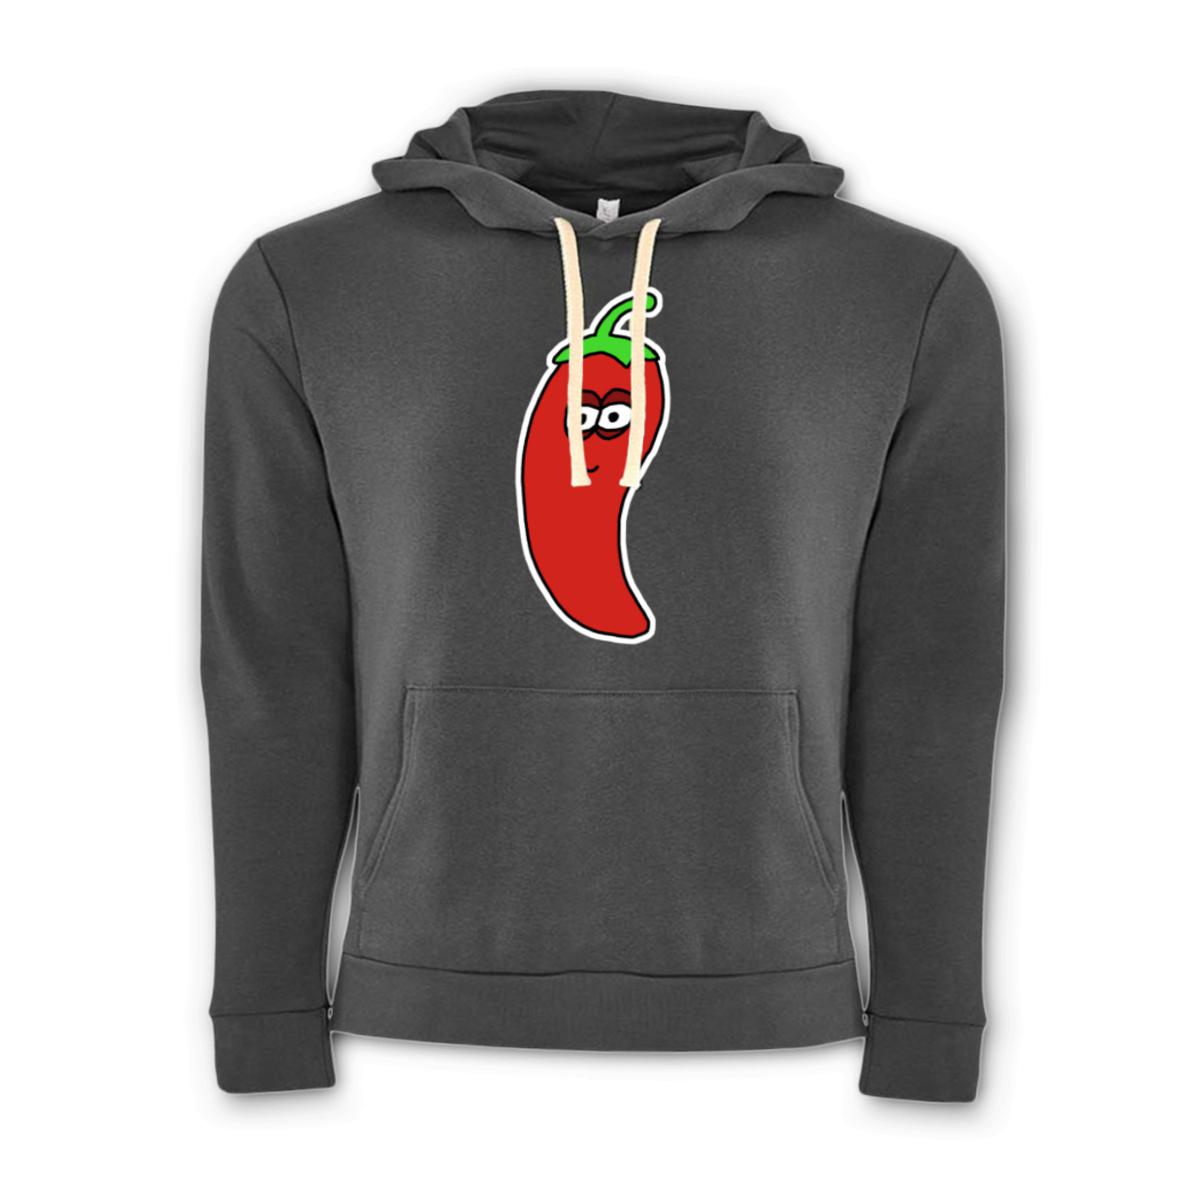 Chili Pepper Unisex Pullover Hoodie Small heavy-metal